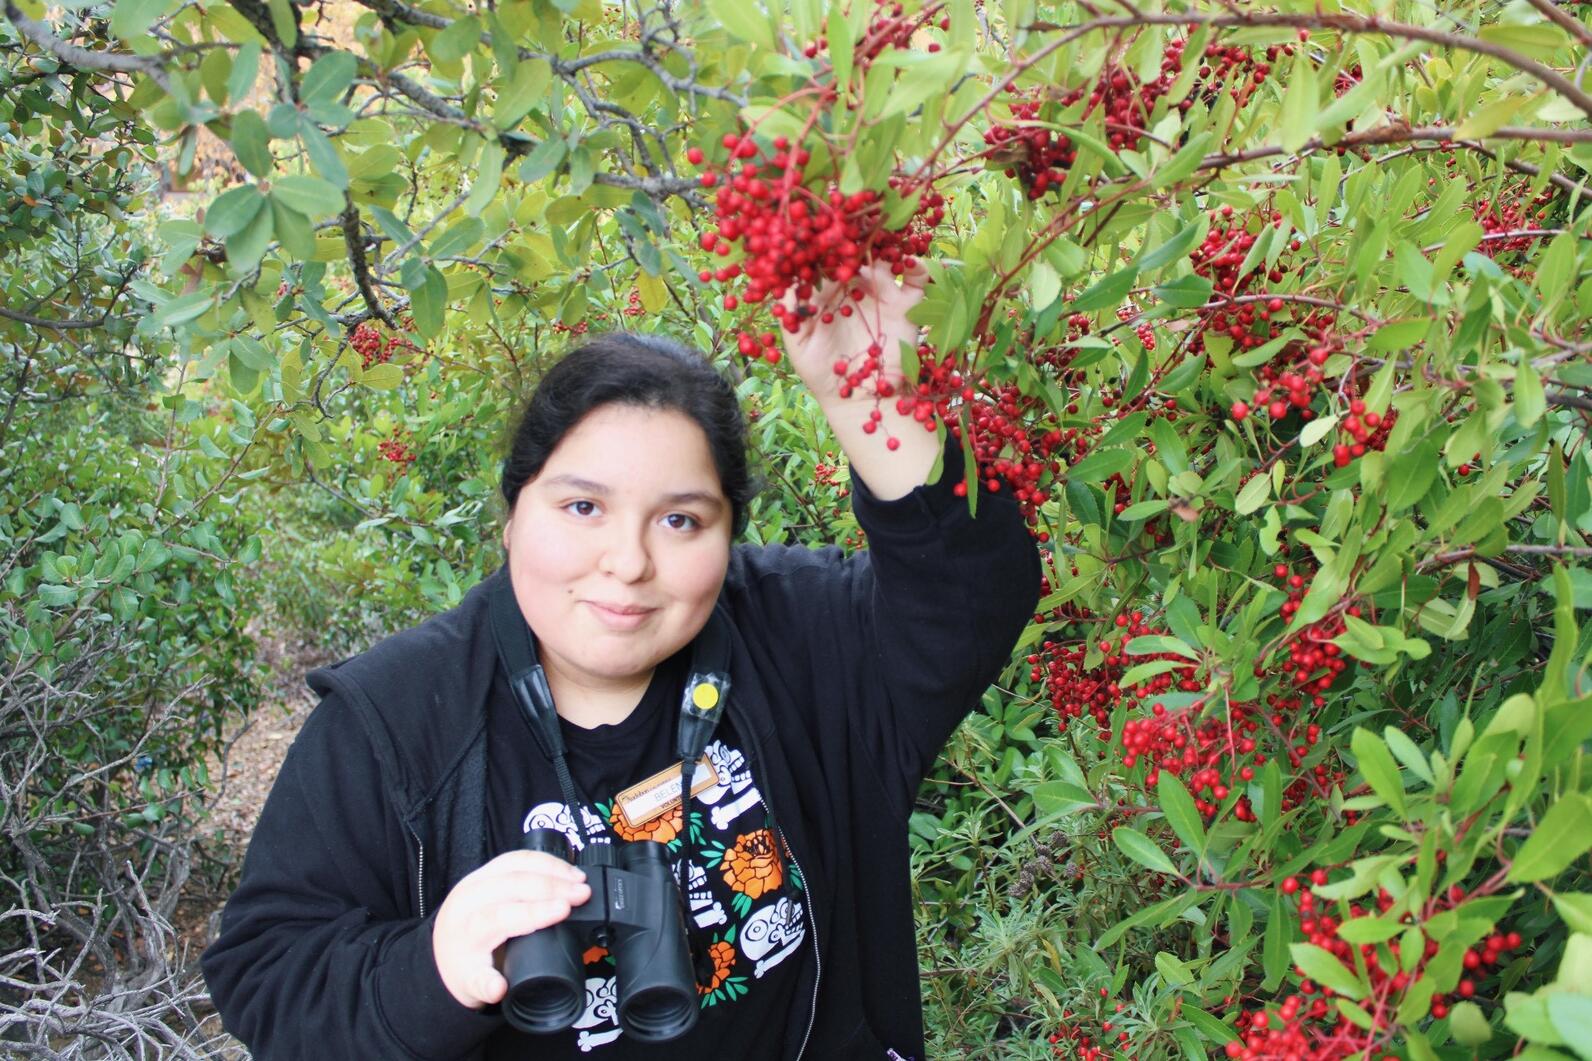 Belen surrounded by bright, red Toyon berries while holding a binocular.